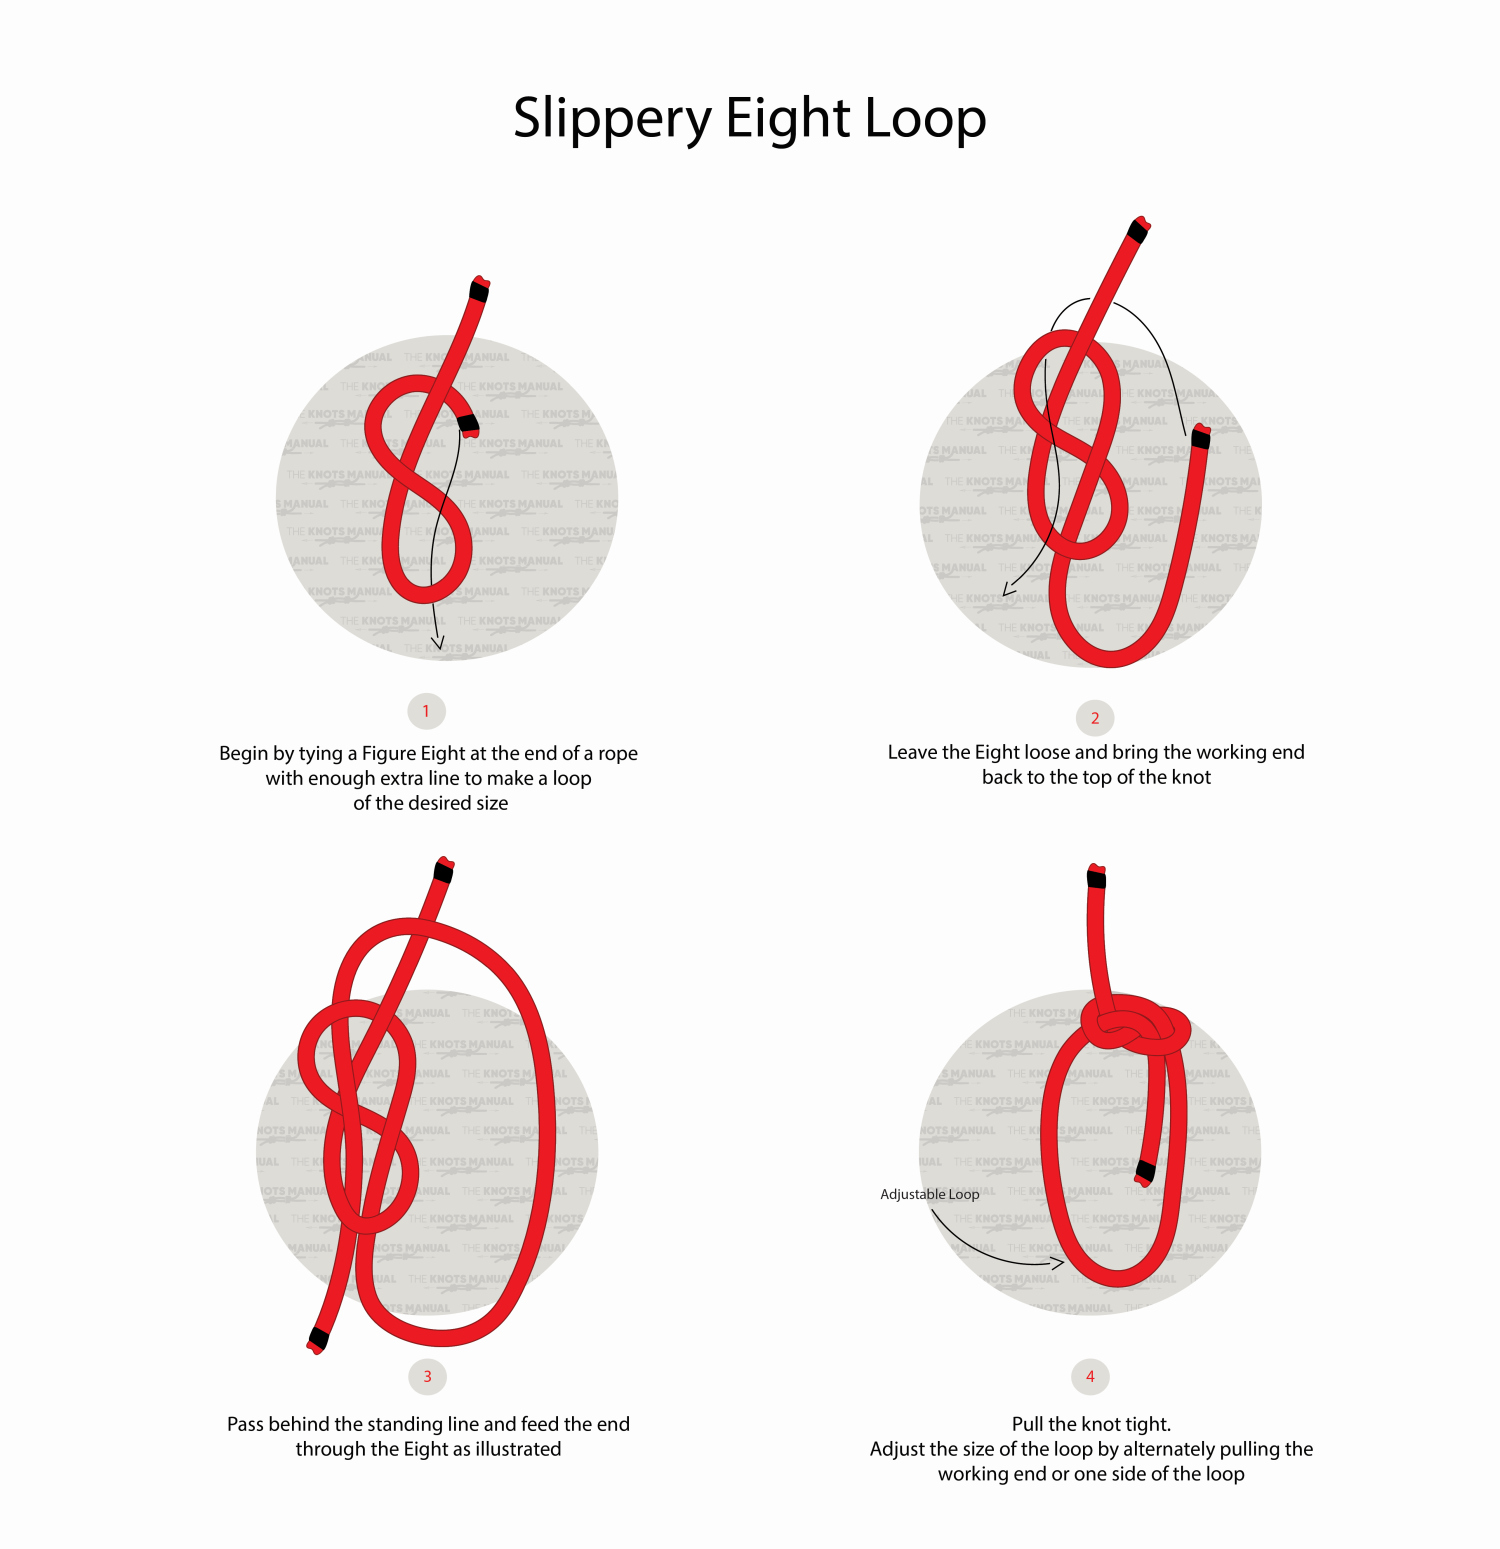 How to Tie a Slippery Eight Loop Knot Step by step